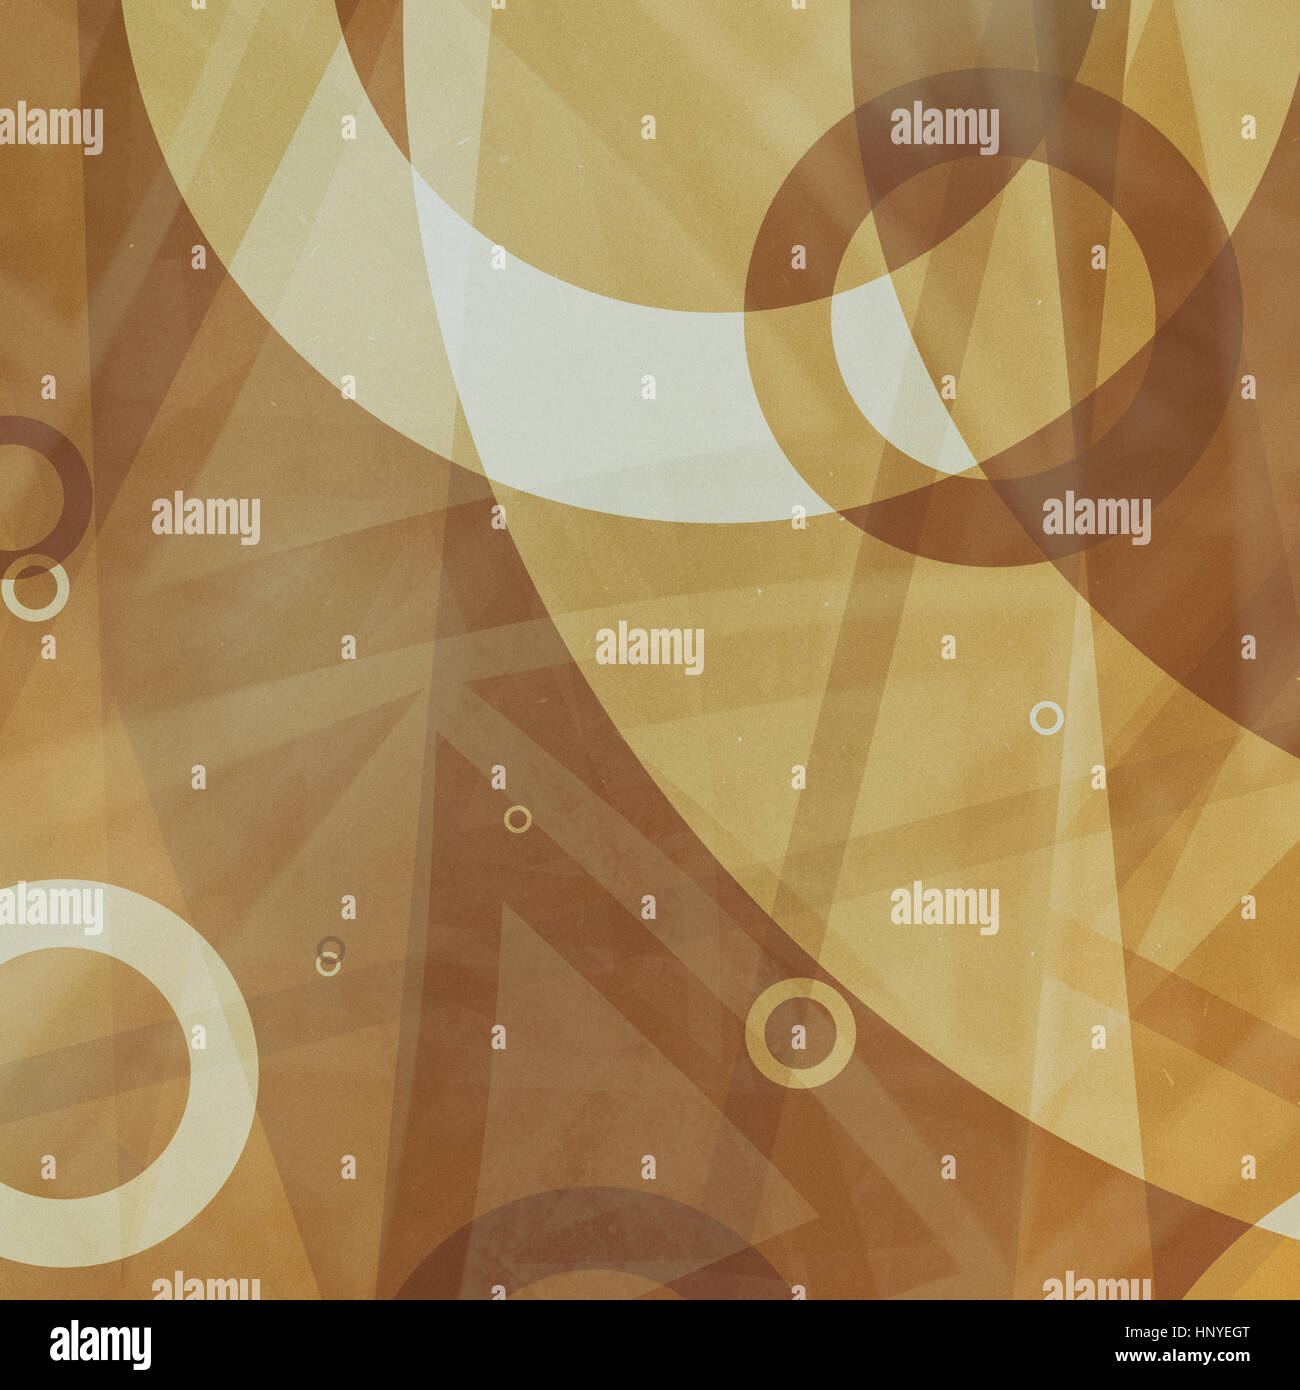 rings and triangles of brown and white in abstract background pattern, random sizes of transparent white circle shapes layered on light yellowed brown Stock Photo